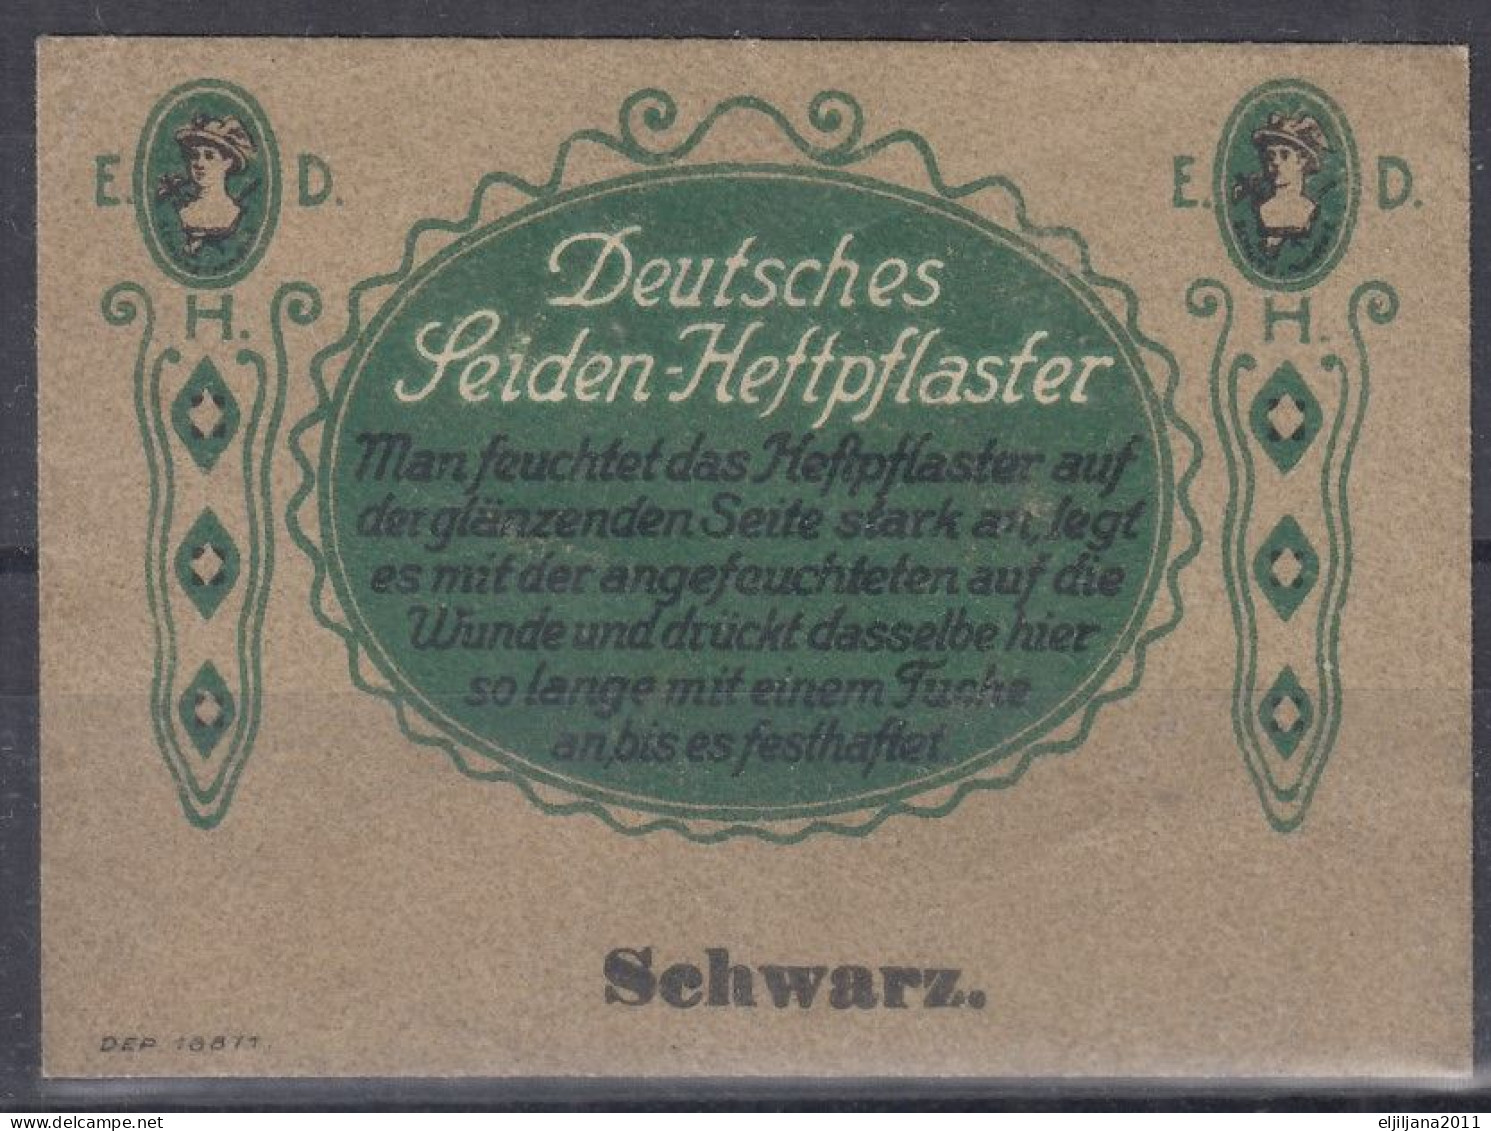 Deutsches Leiden Heftpflaster E.D.H. / Glassine Envelopes For Stamps ? Protective Bags 70 X 50 Mm / DEP 188/1 Schwarz - Clear Sleeves